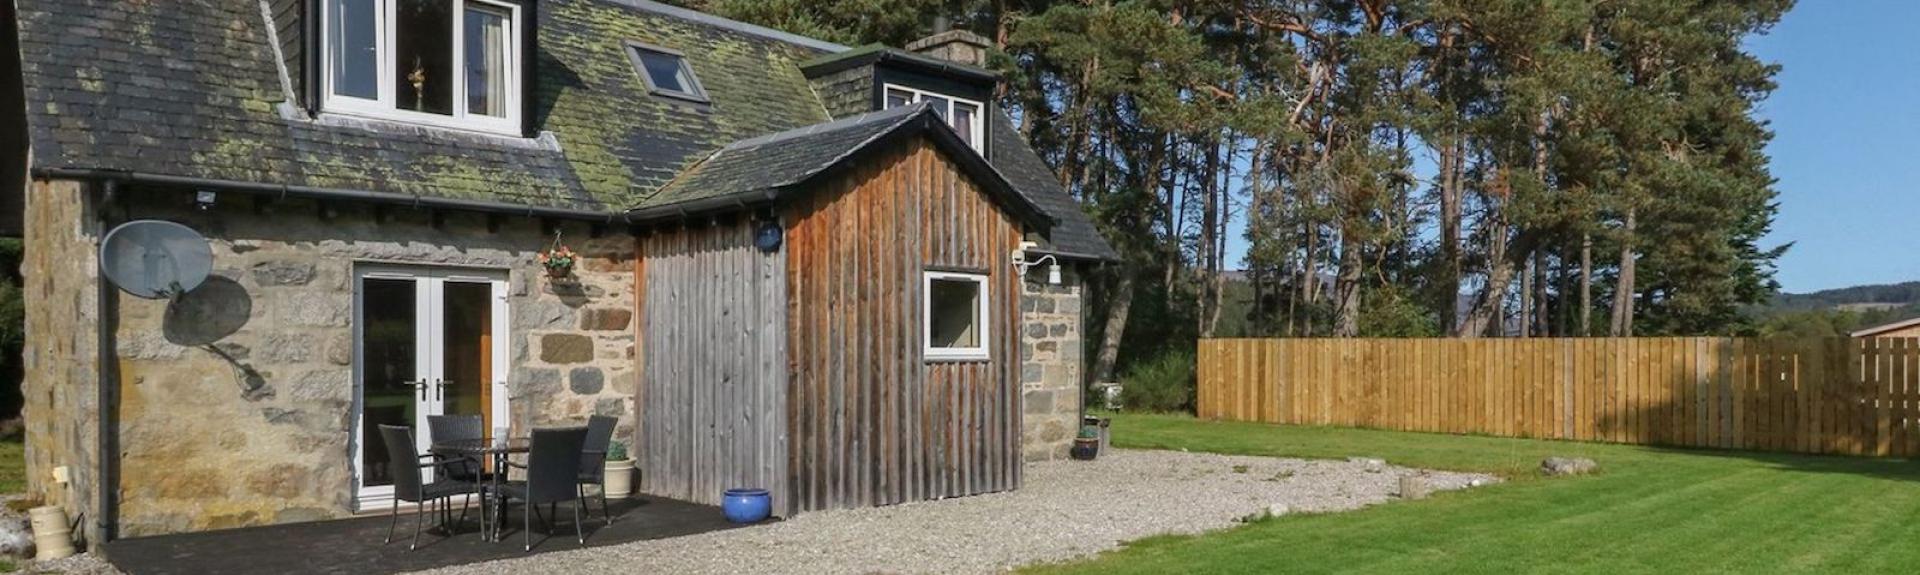 Backed by tall pine trees a 2-storey tone-built Newtonmore holiday cottage overlooks a large lawn.